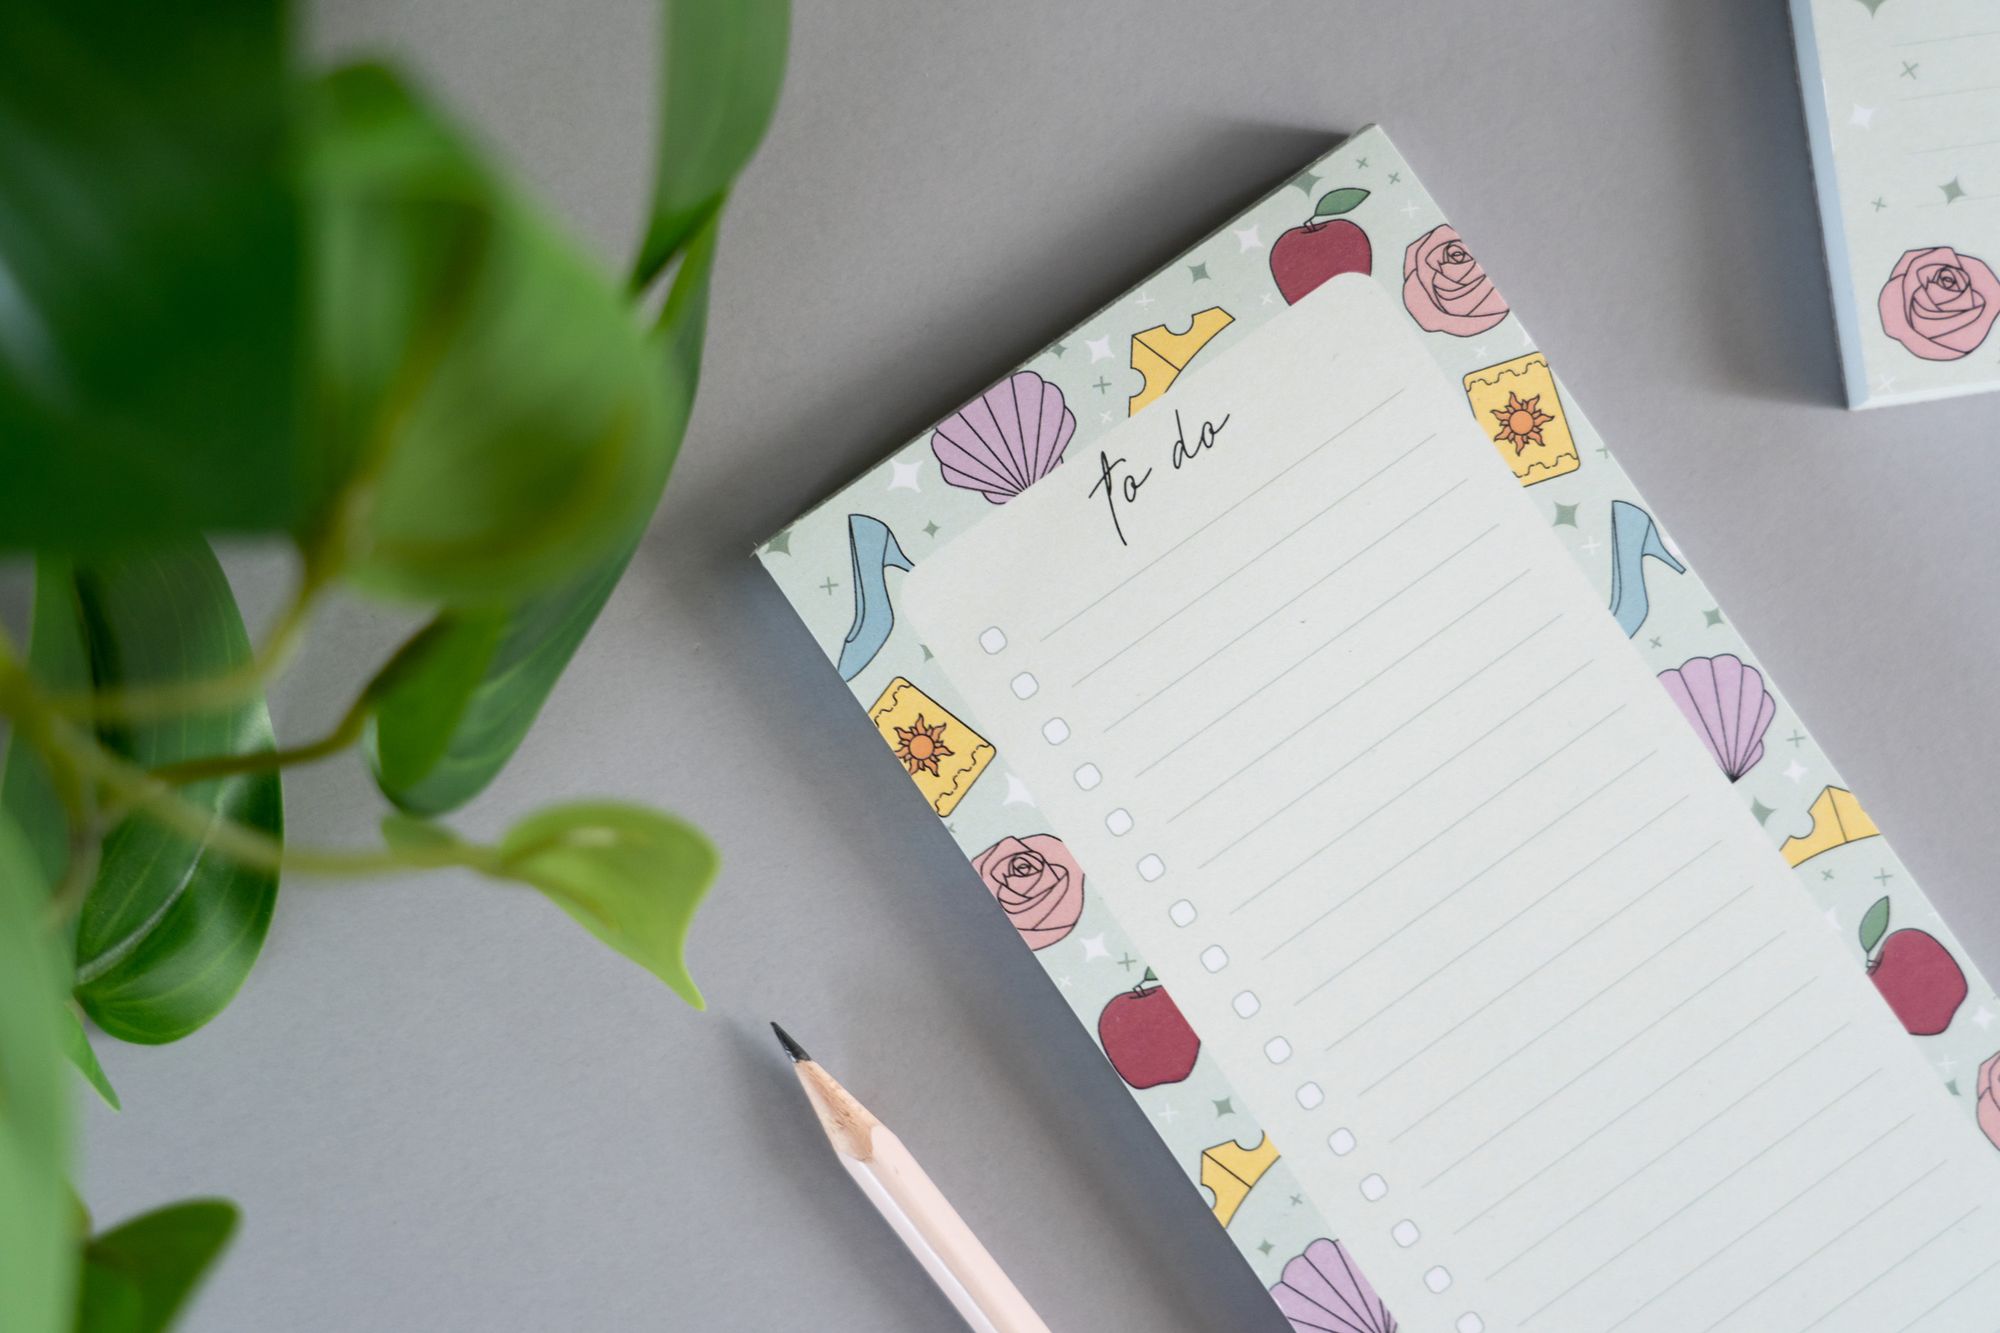 Gift ideas for that friend obsessed with stationery